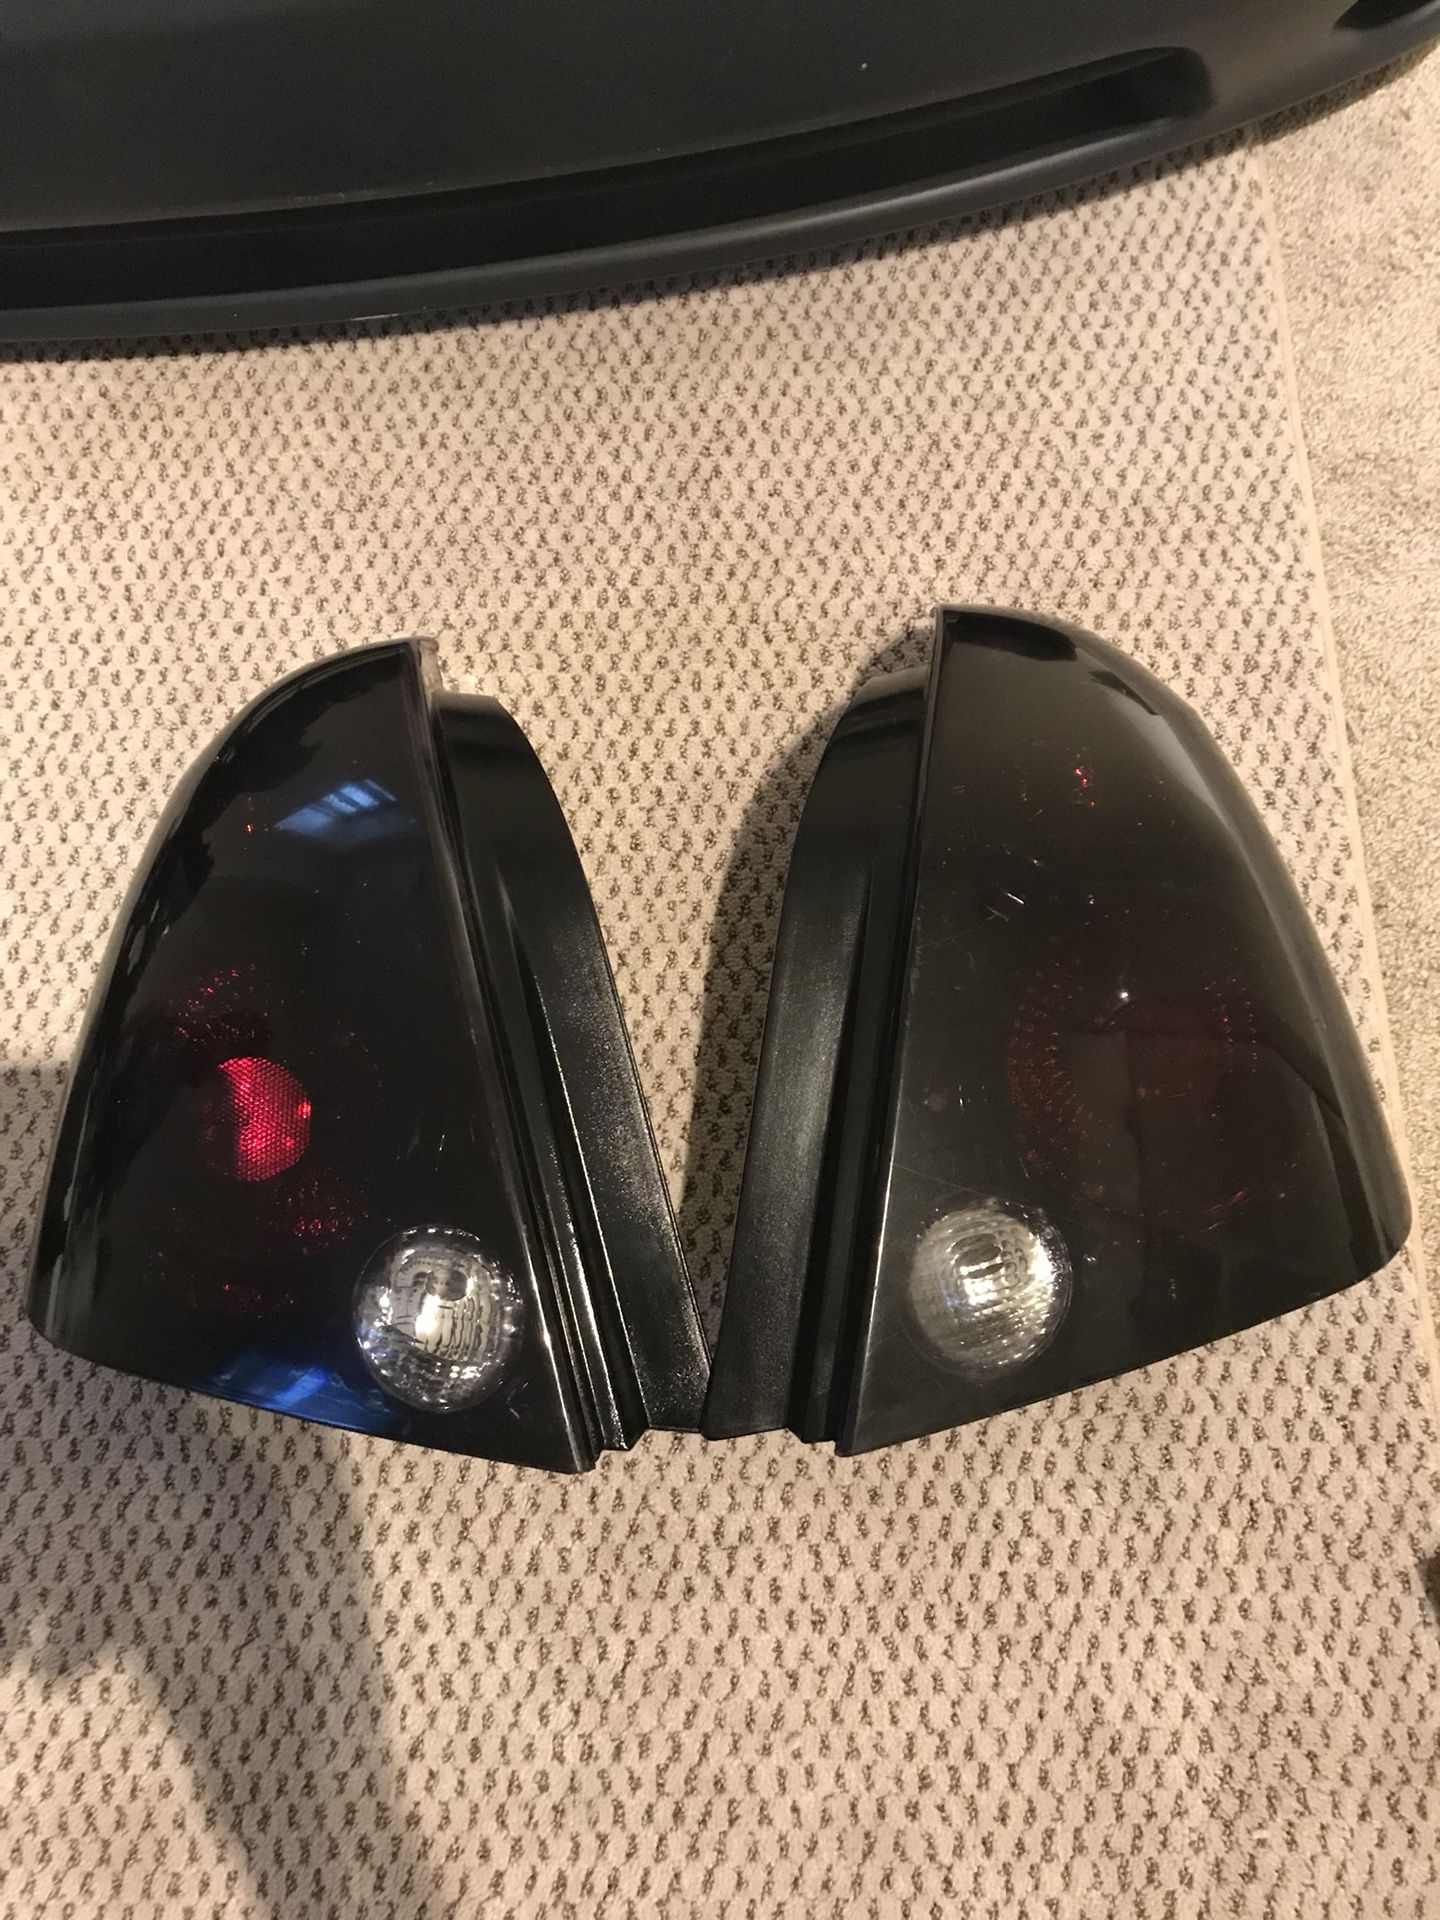 03 Nissan Altima front bumper and smoked tail lights